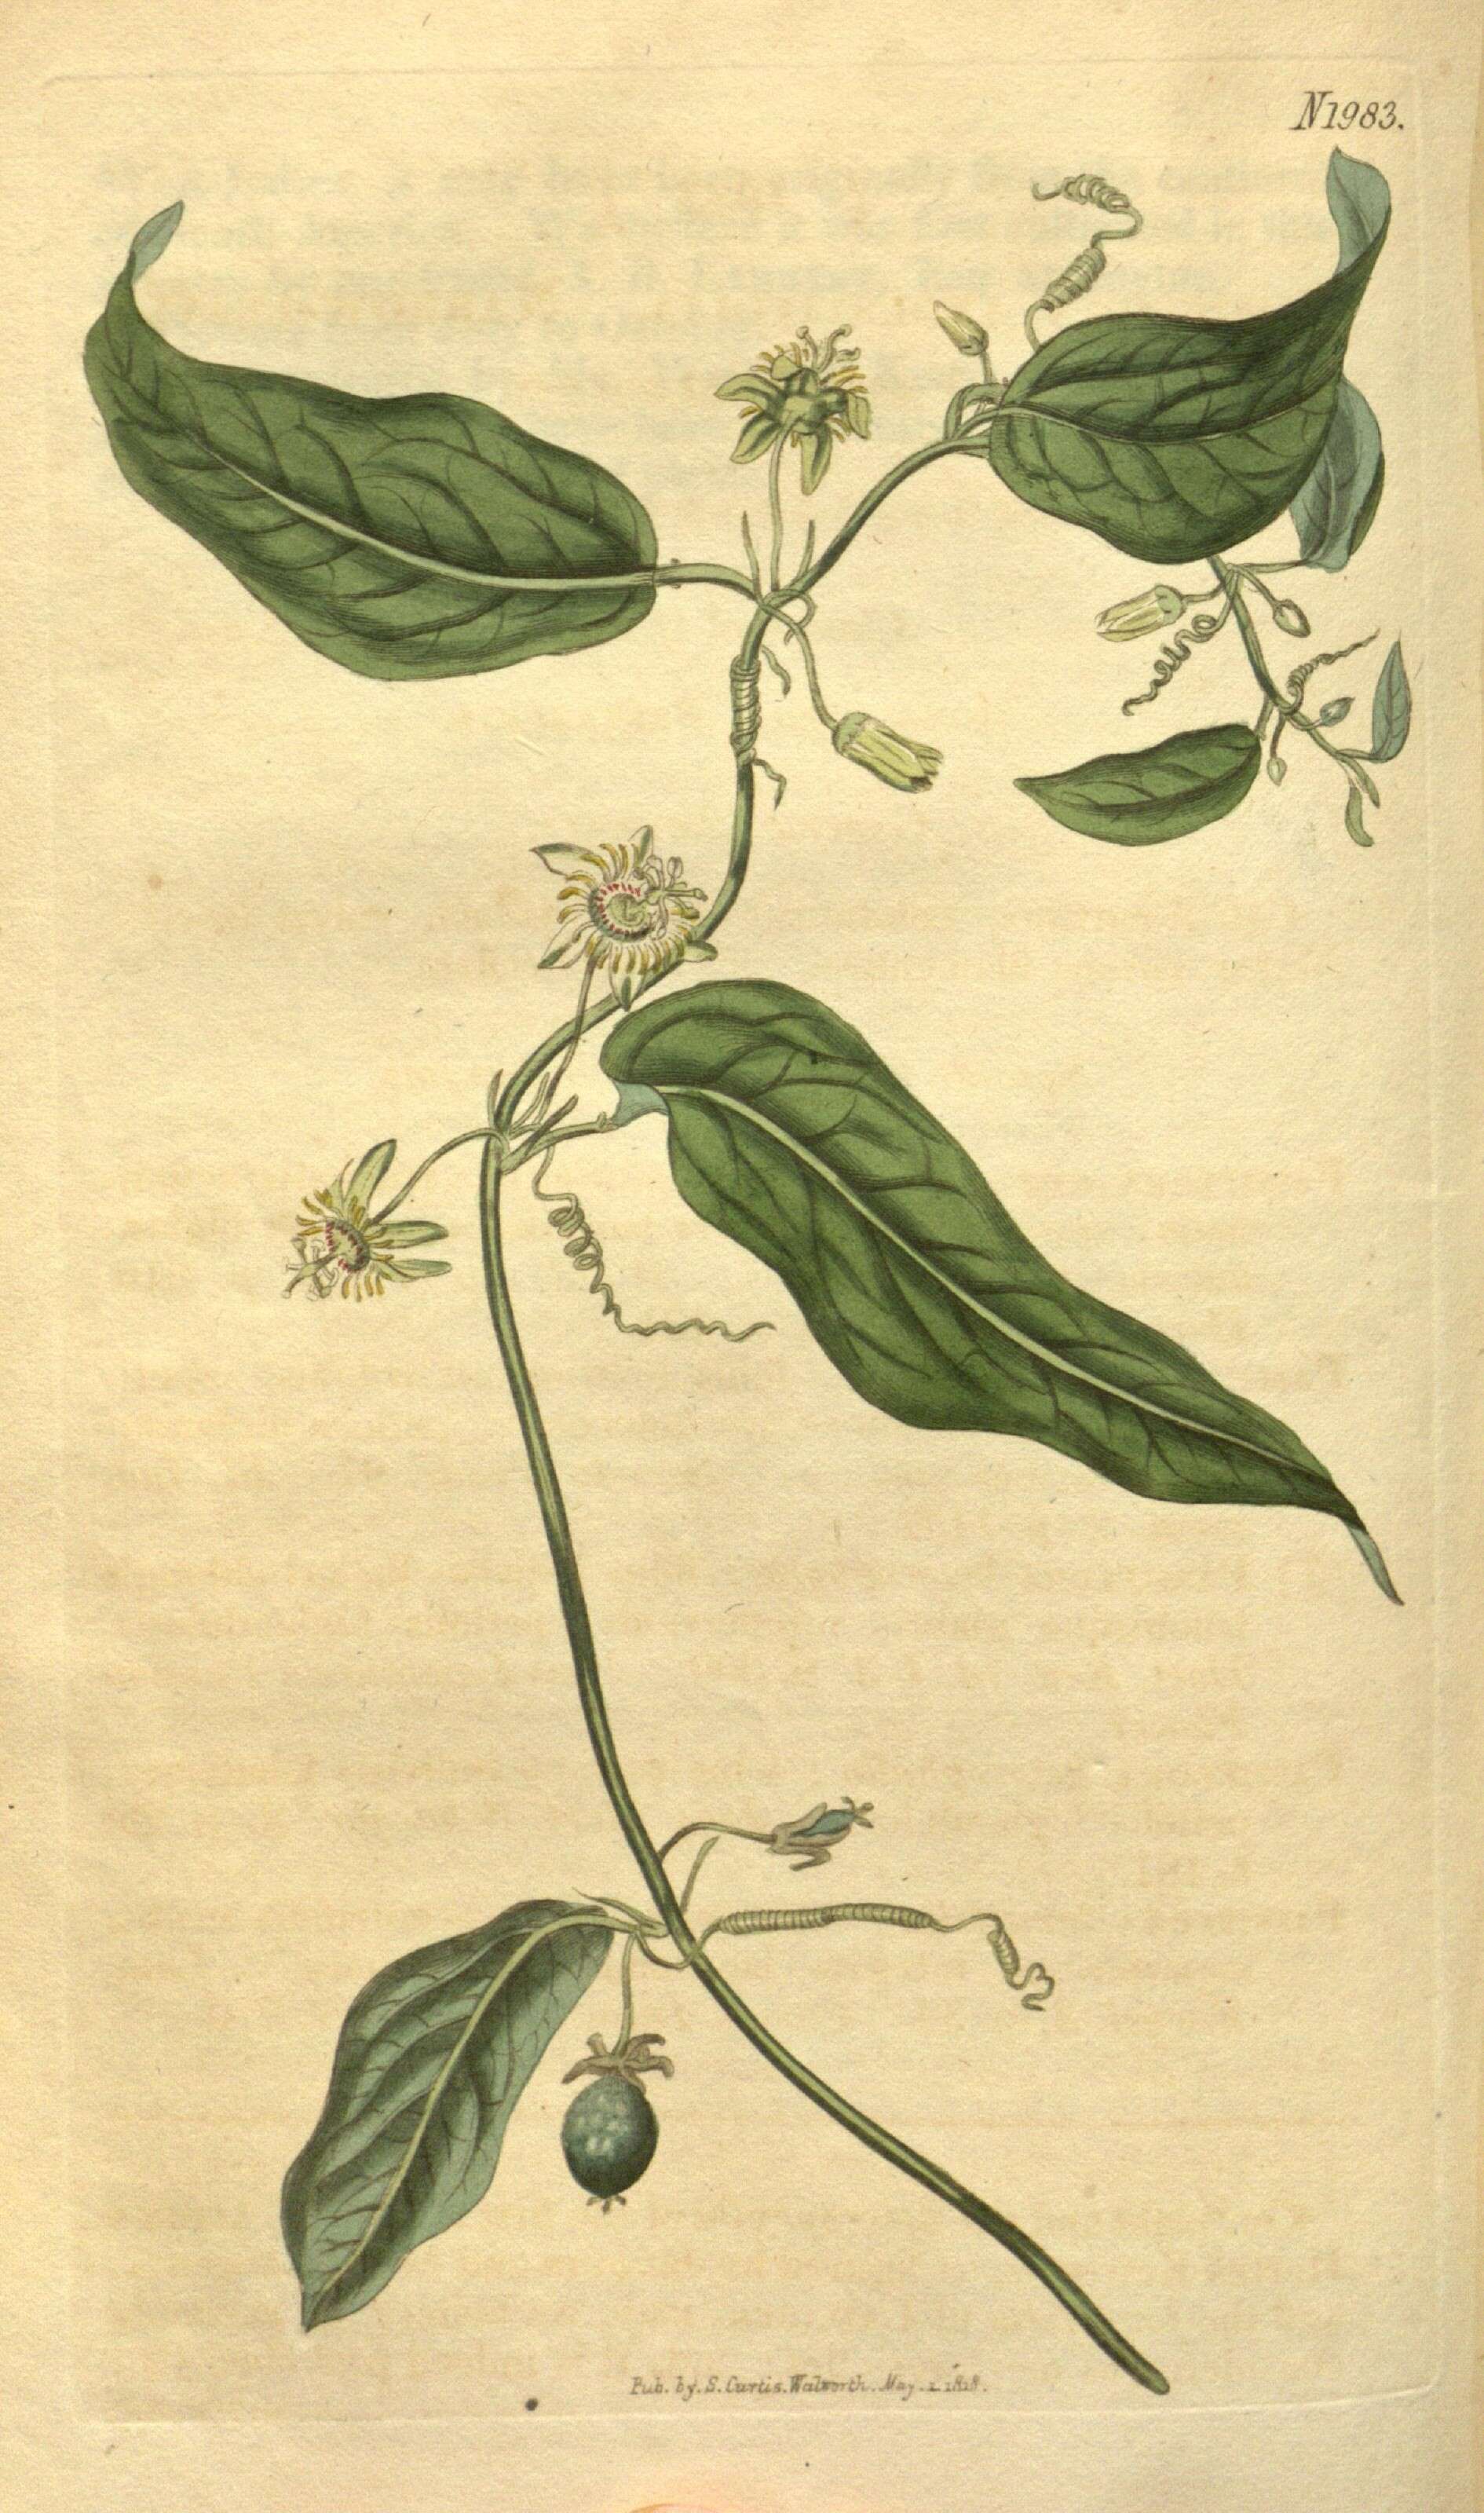 Image of corkystem passionflower